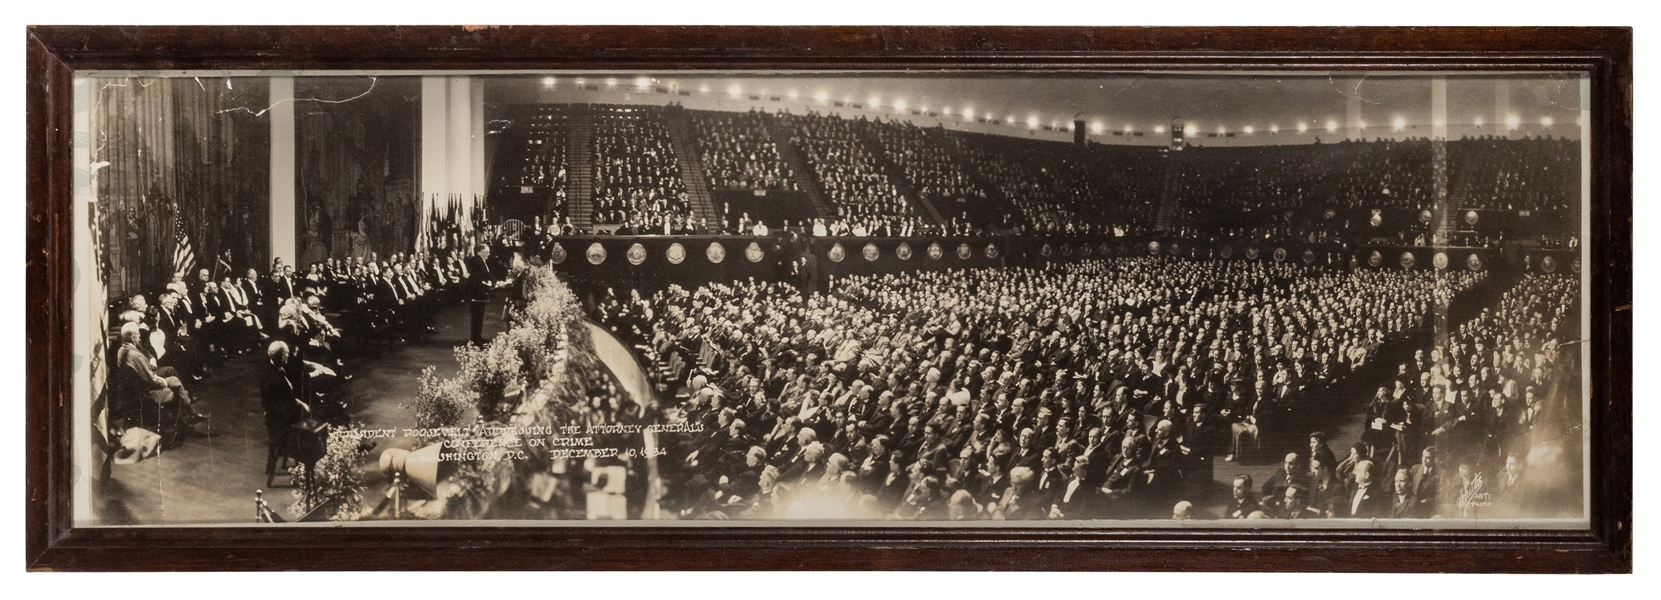  Franklin D. Roosevelt Conference on Crime Panoramic Photo. Was...